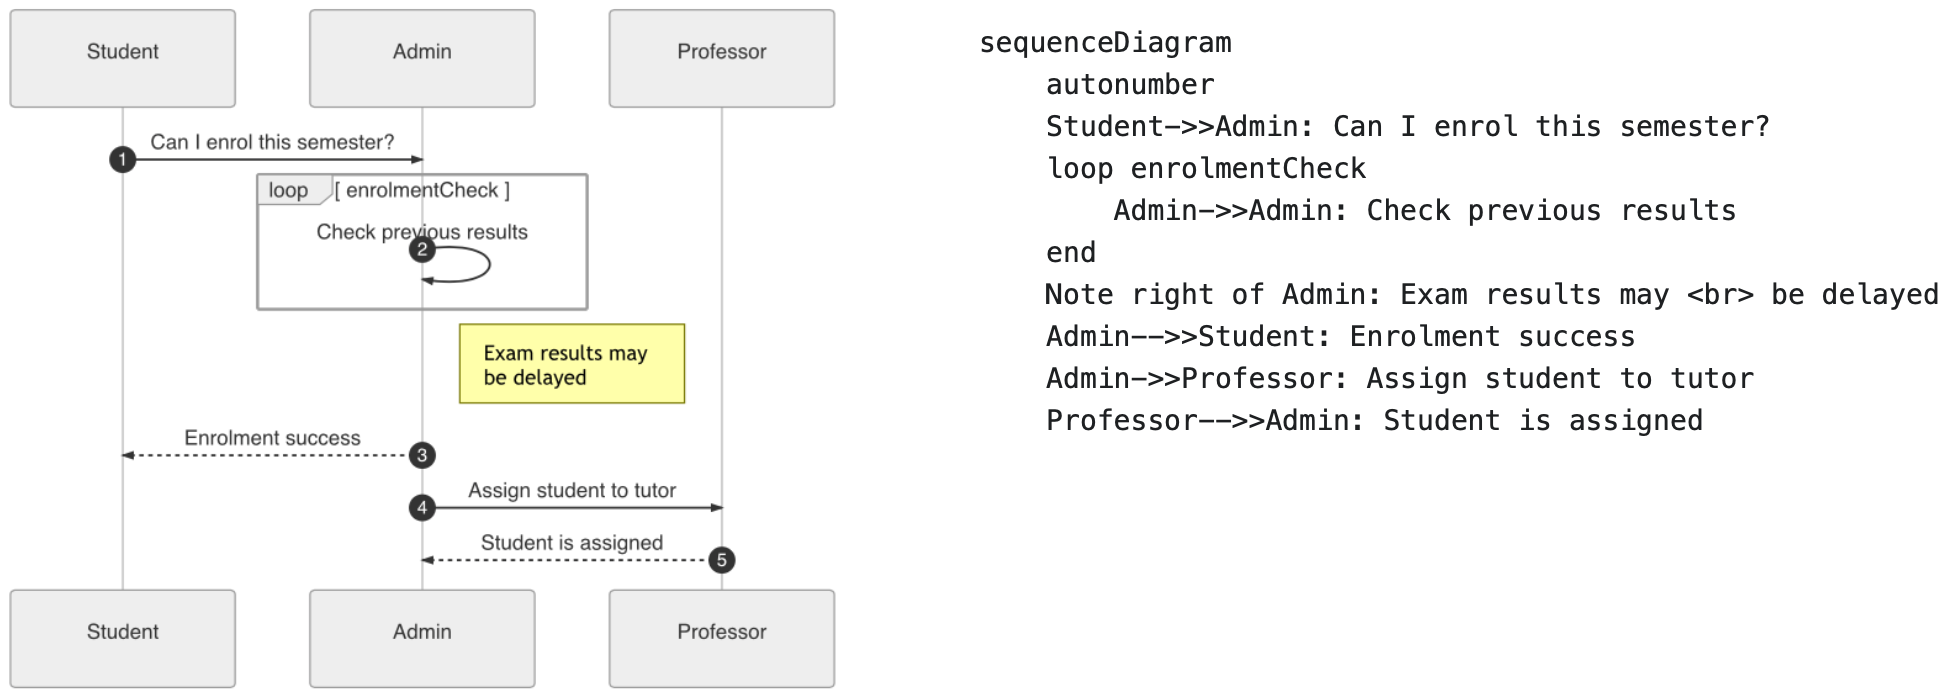 An example sequence diagram inserted from Mermaid code